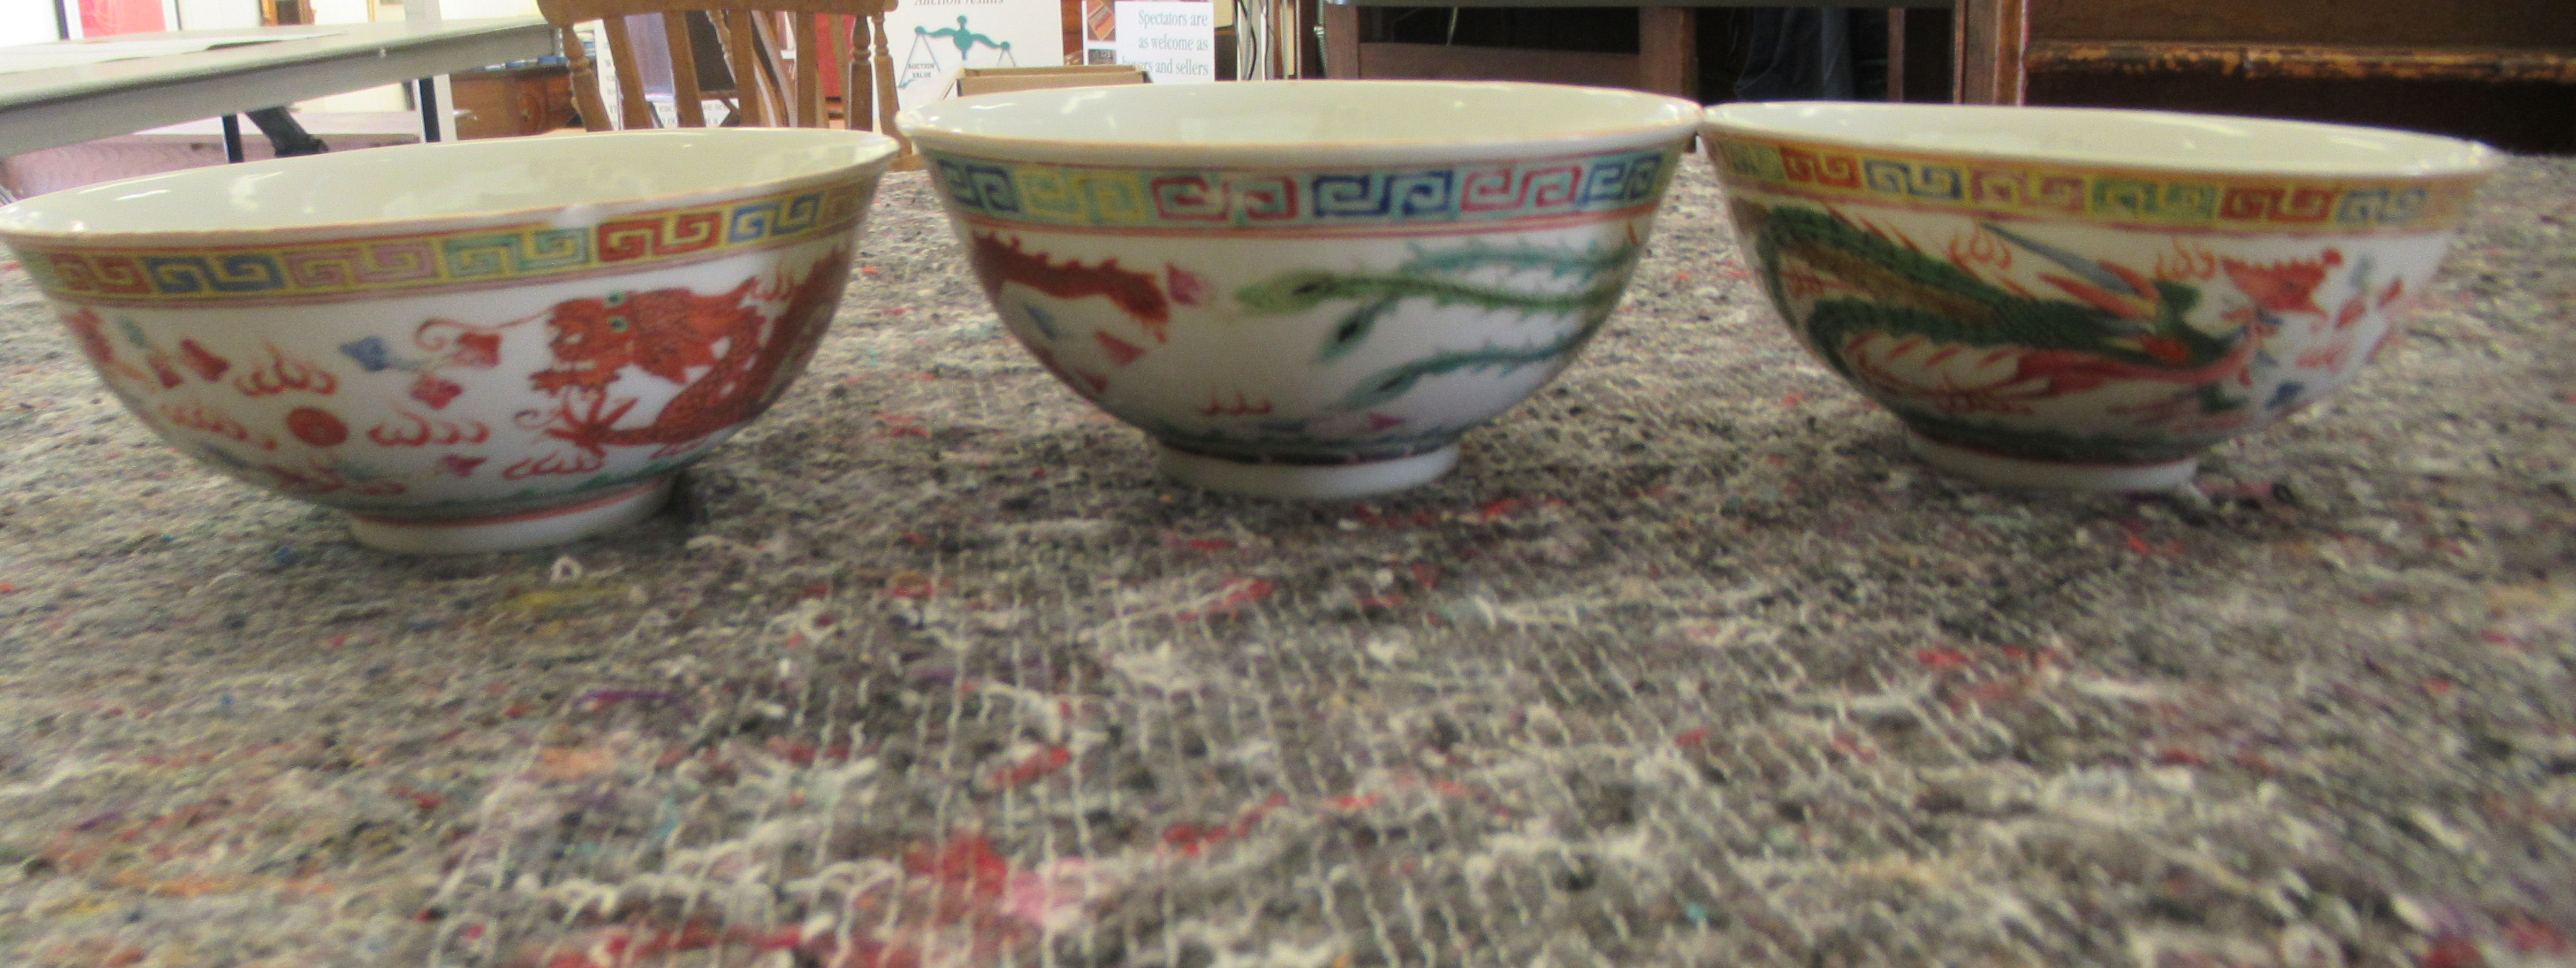 Modern Chinese porcelain tableware: to include a four part food warmer; and six footed bowls - Image 5 of 11